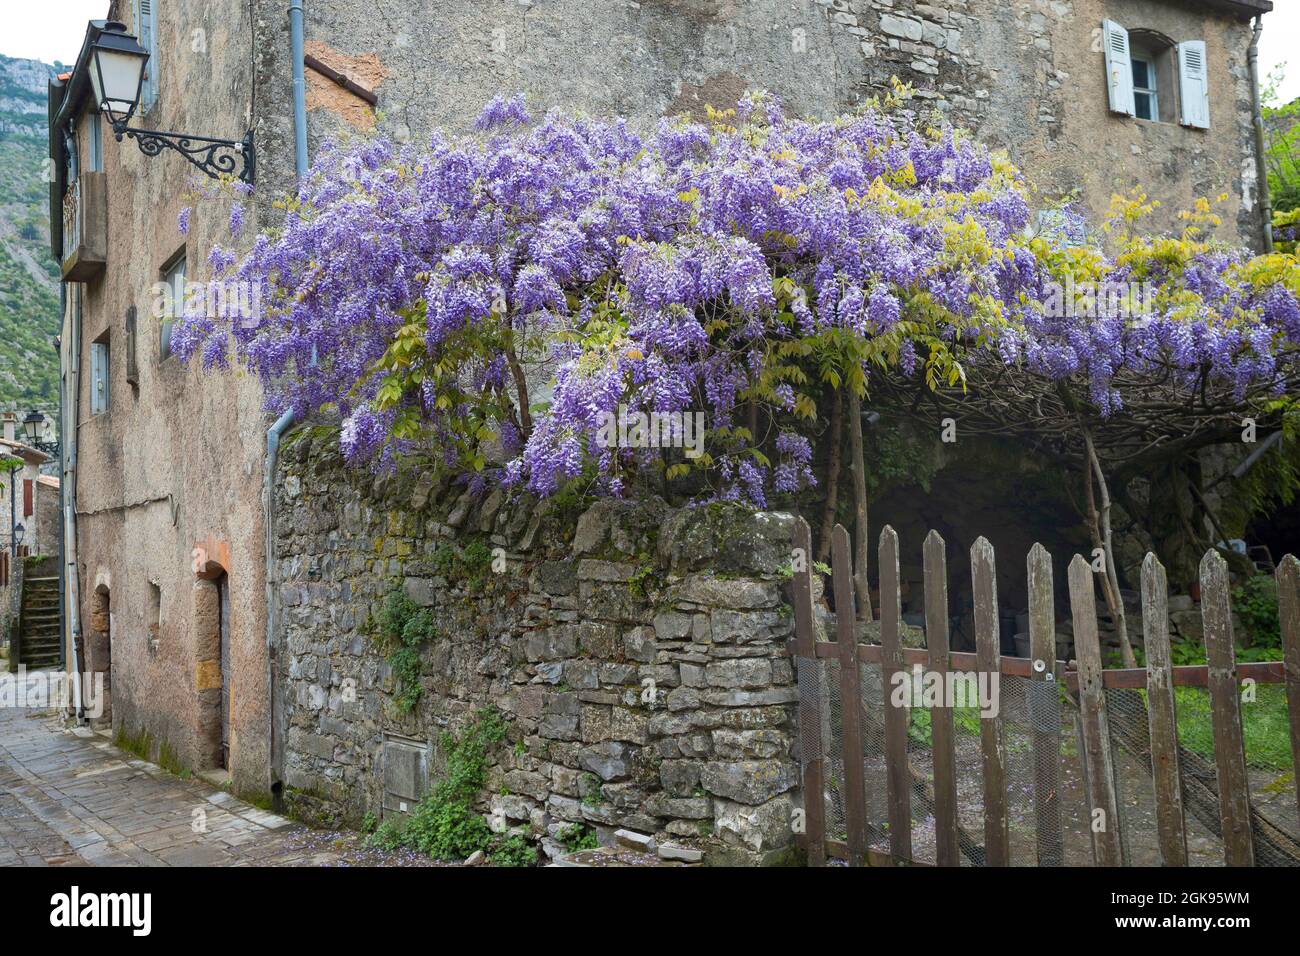 Chinese wisteria (Wisteria sinensis), blooming at an old house, Germany Stock Photo